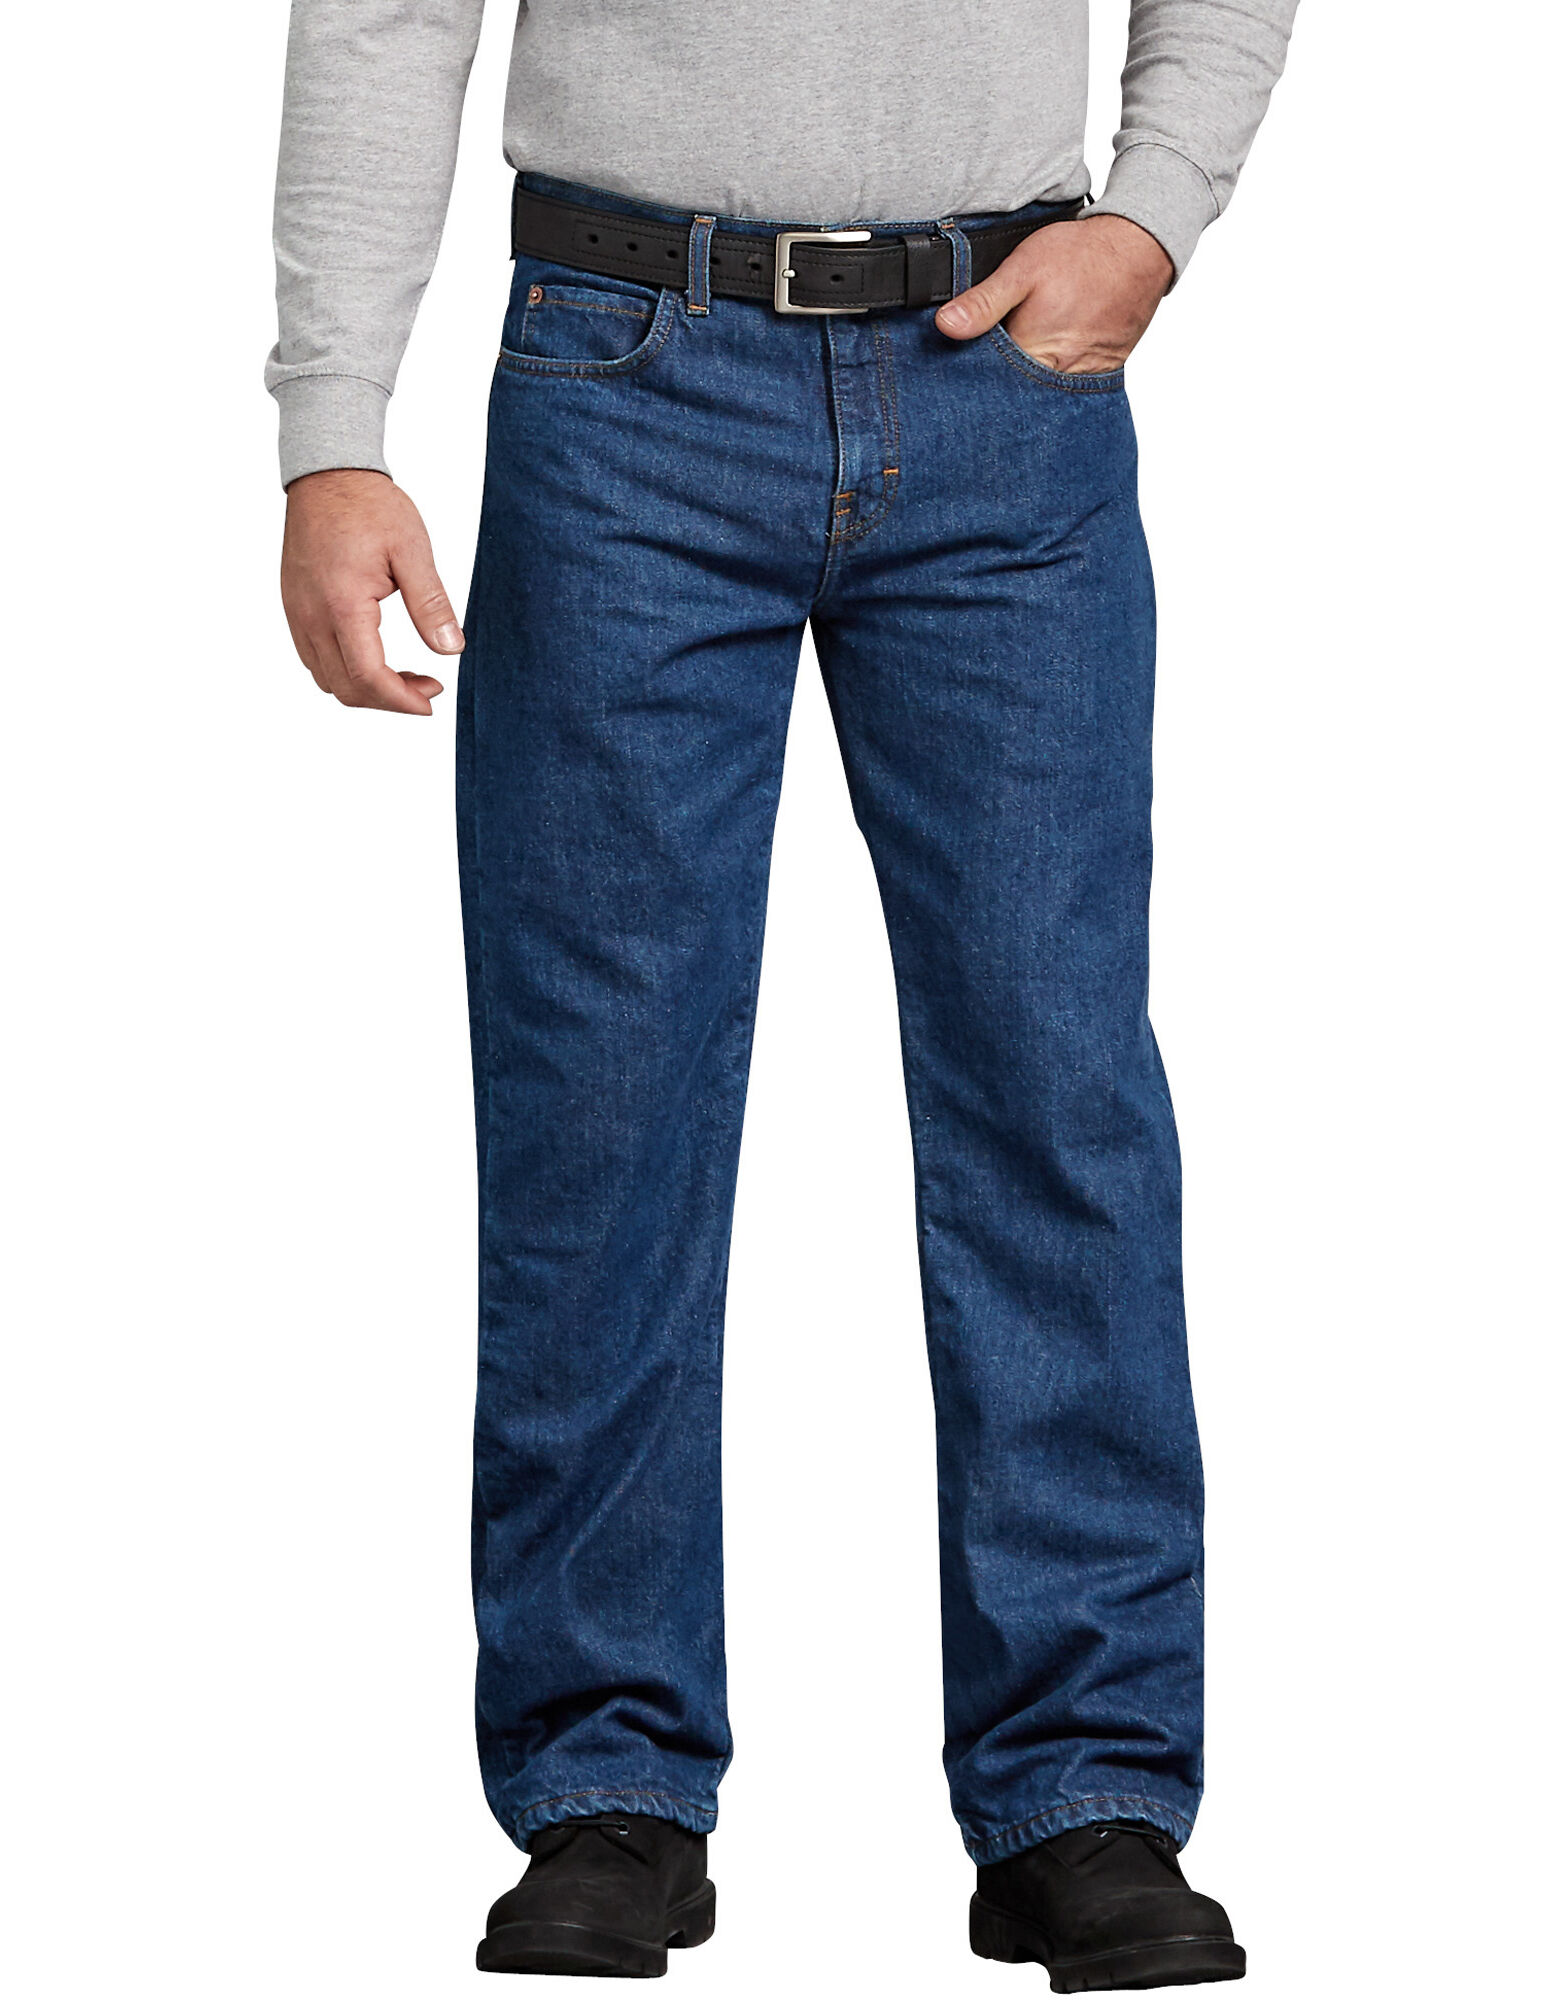 Relaxed Fit Flannel Lined Jeans for Men 